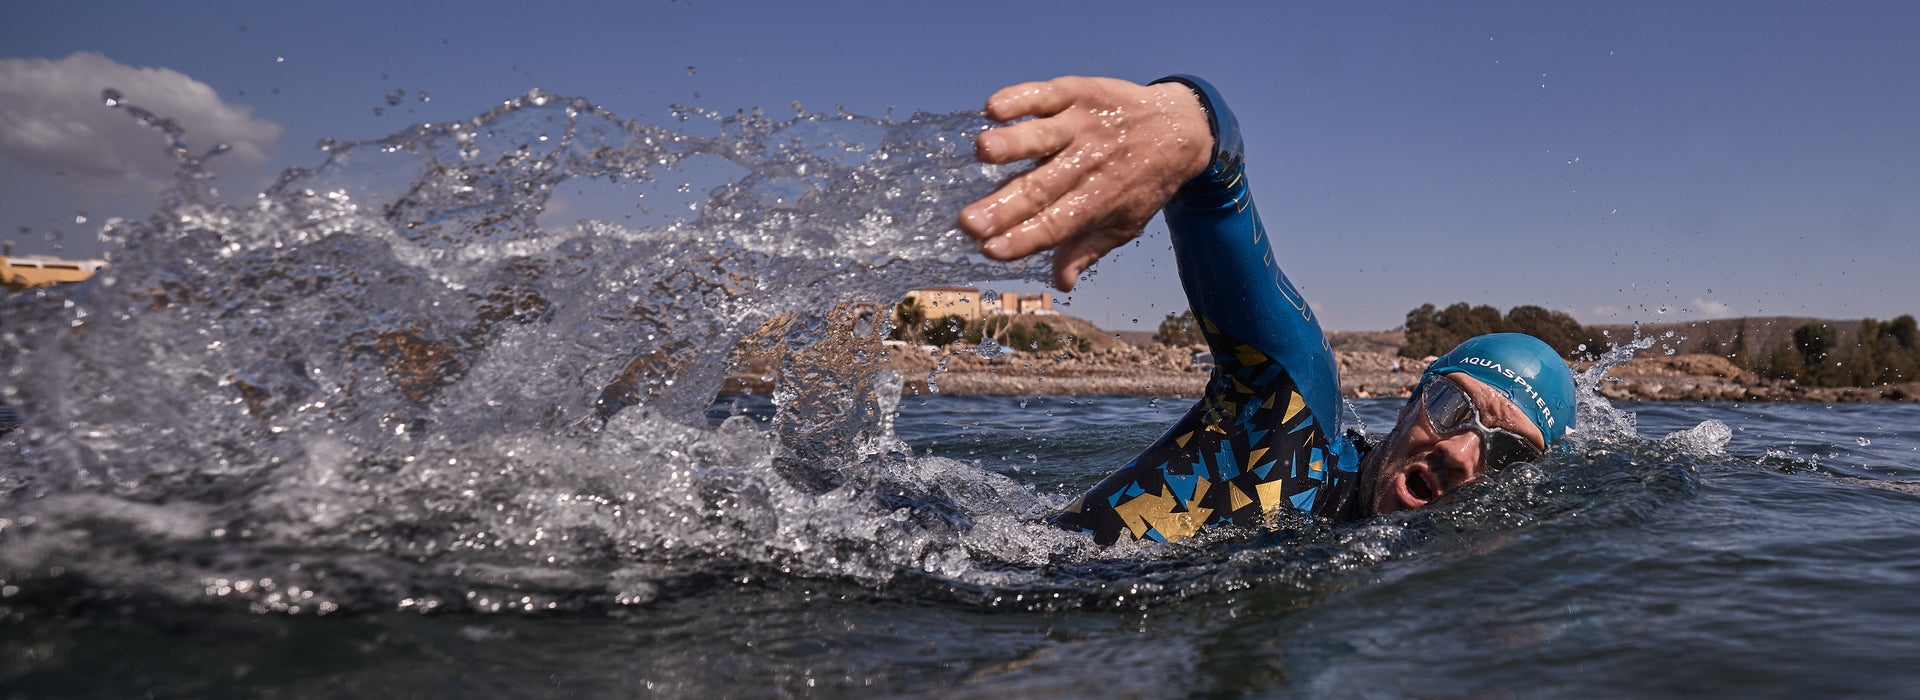 Wetsuits for Performance Swimmers | Aquasphere®